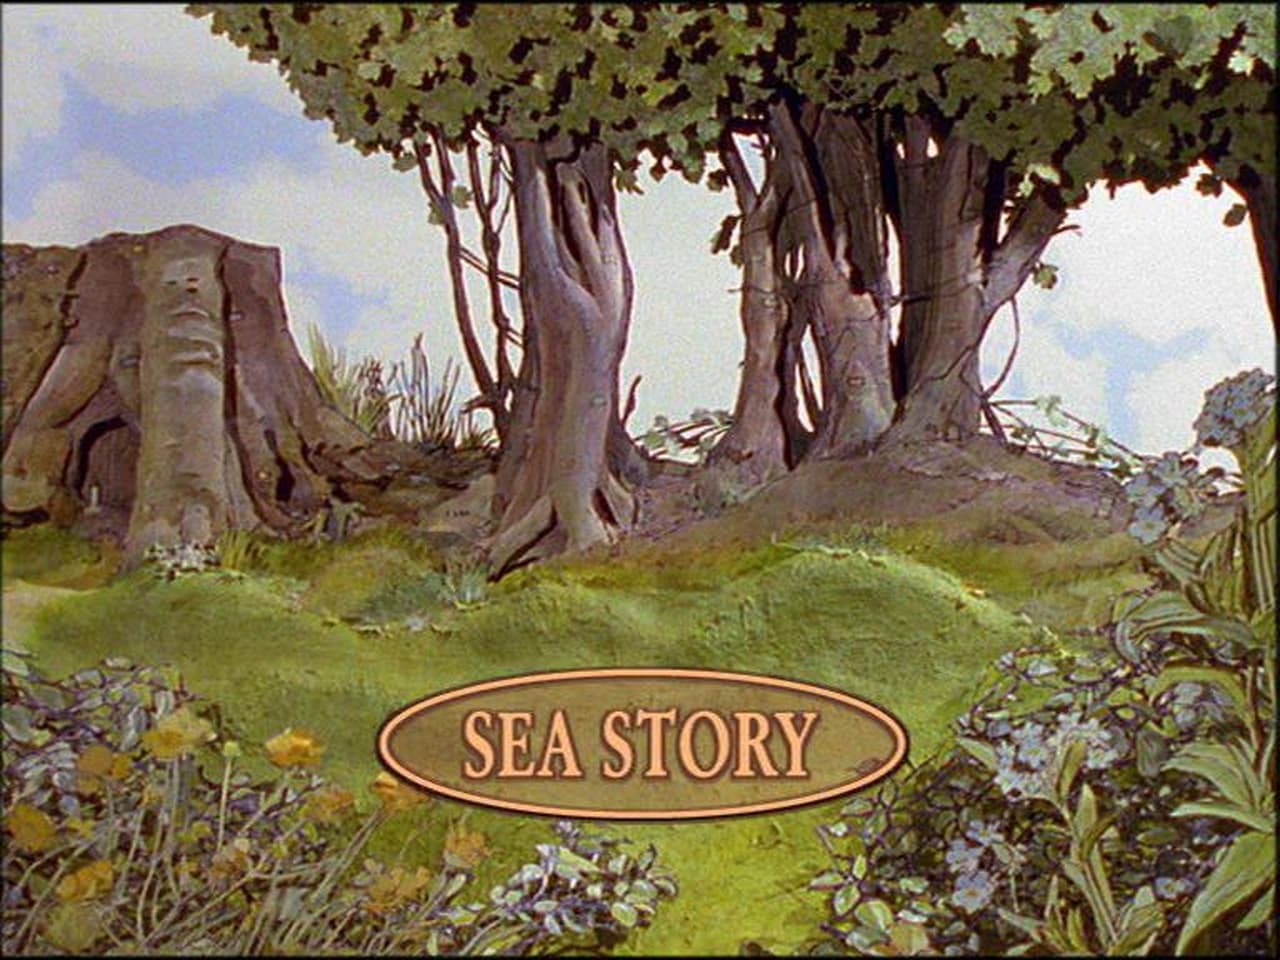 The Sea Story